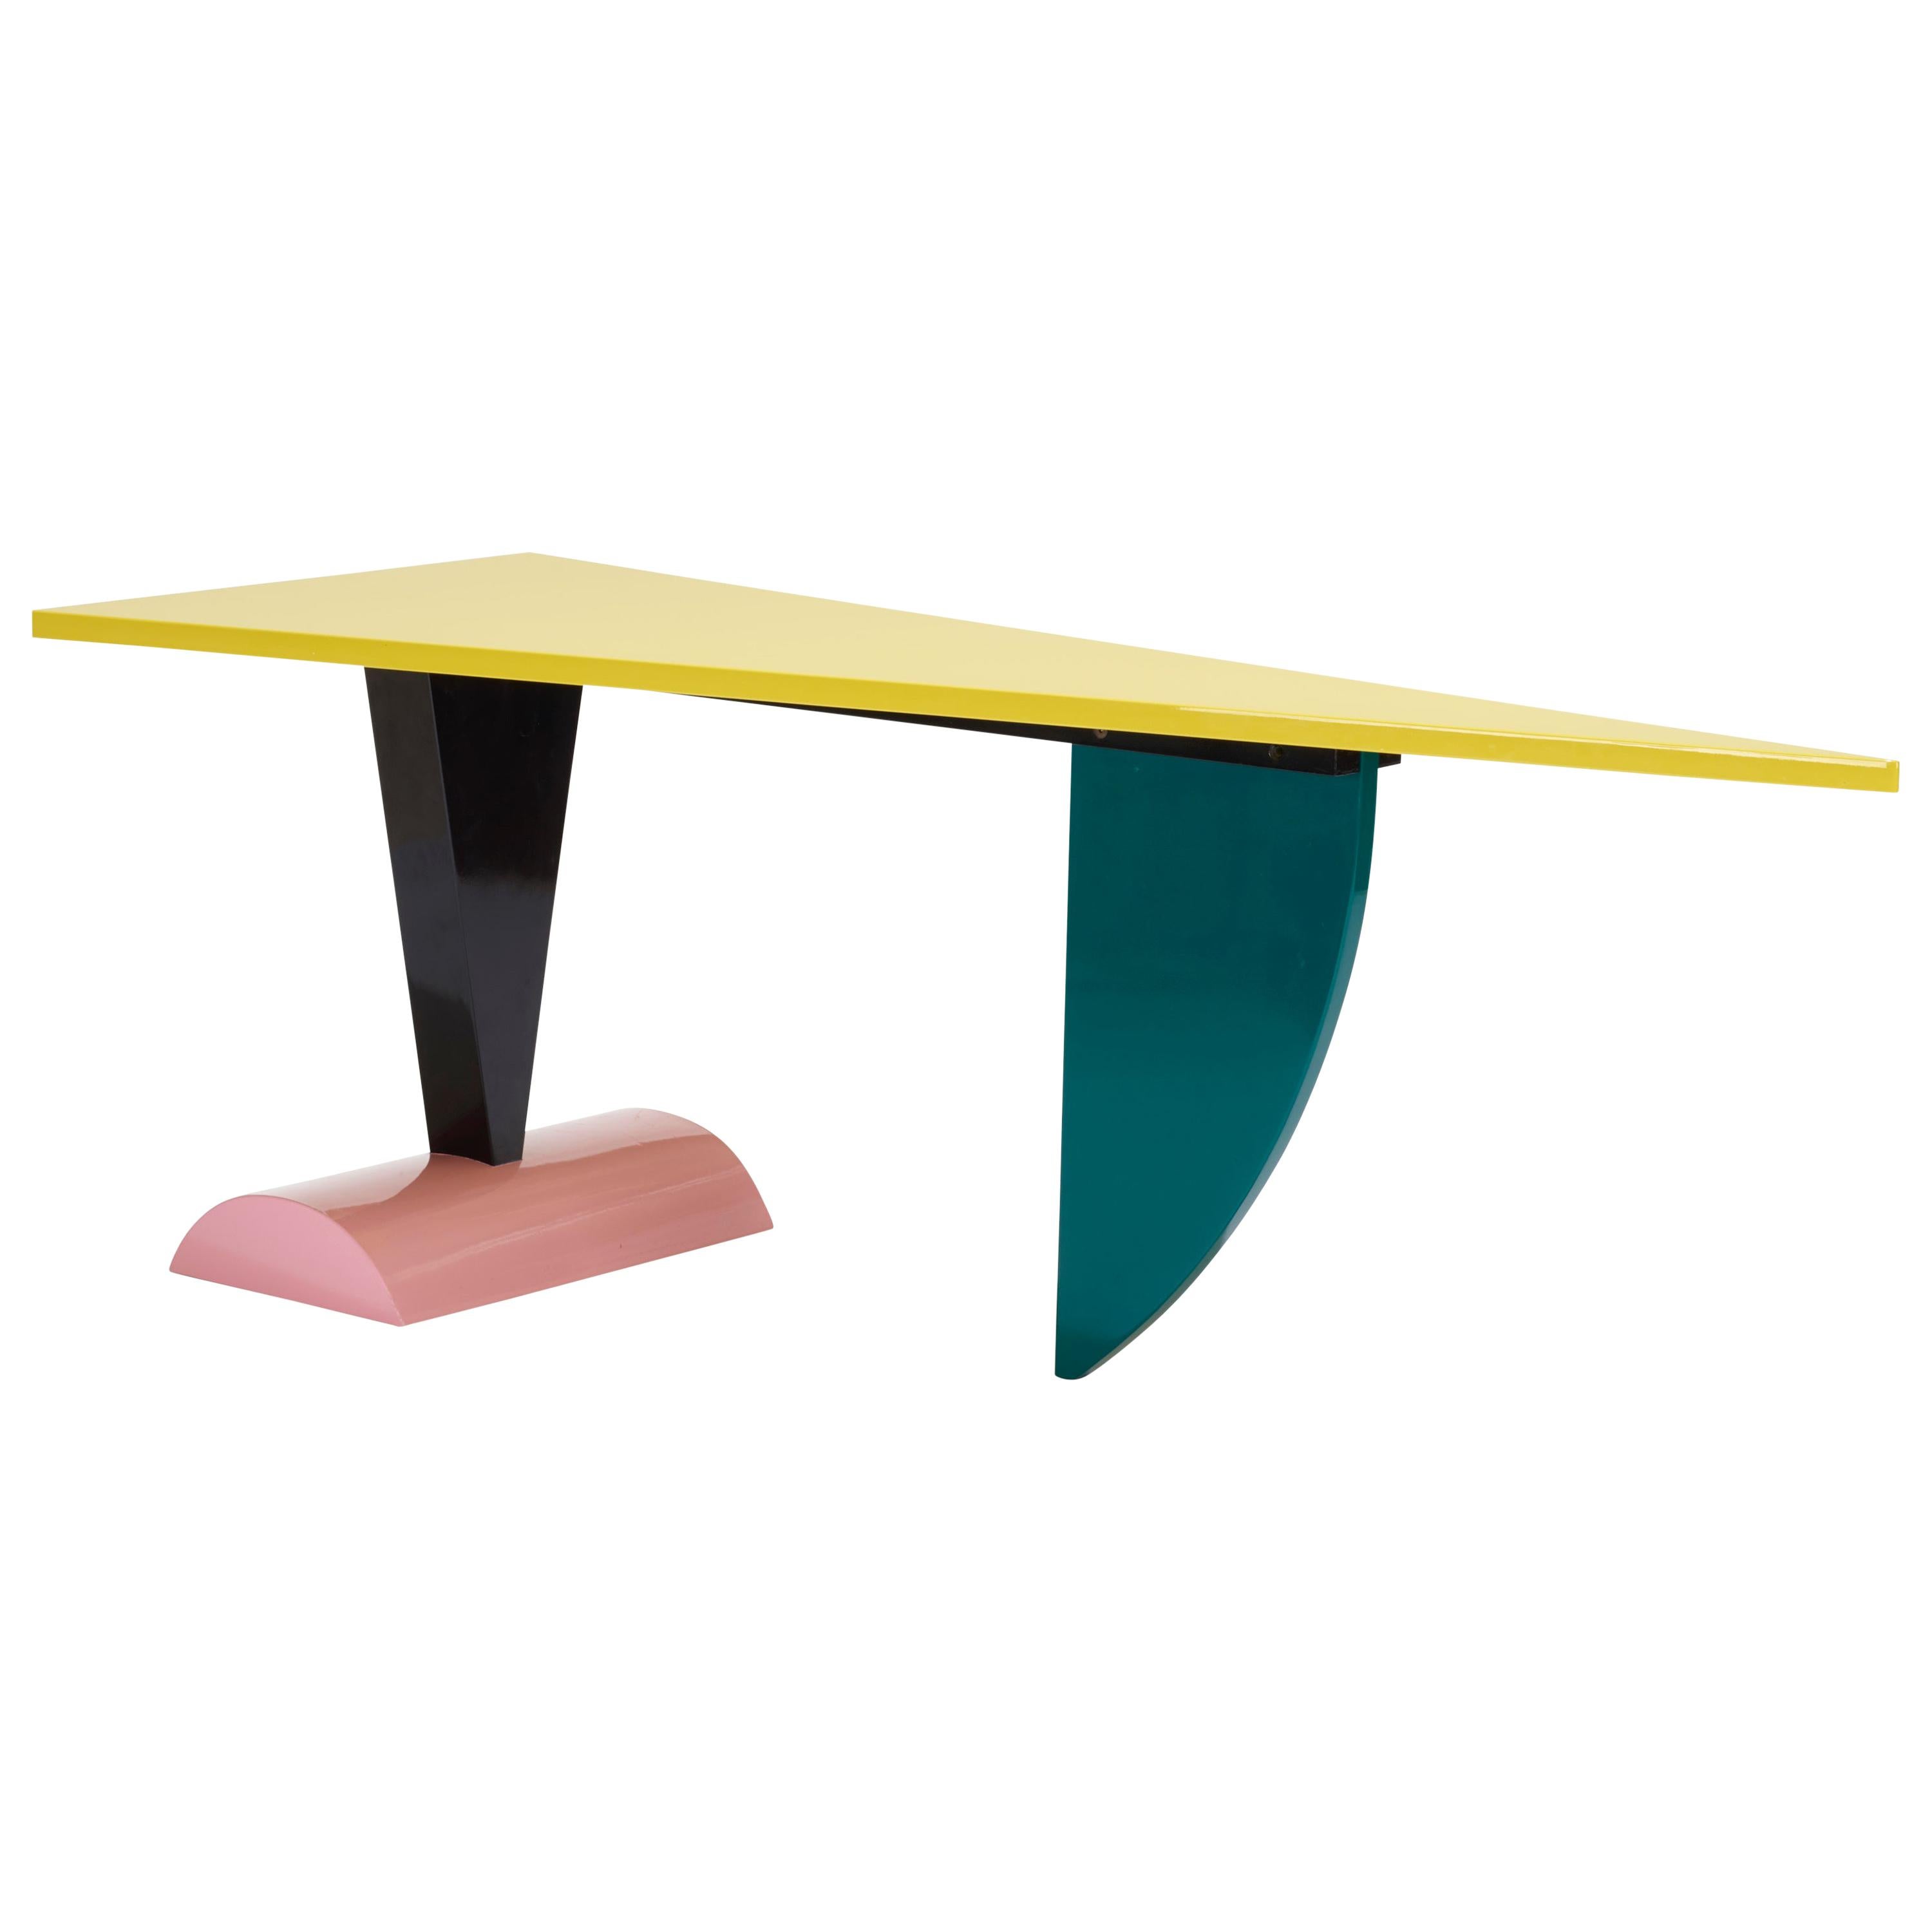 Peter Shire: Original Memphis Milano Brazil Table in Lacquered Wood, Italy 1981